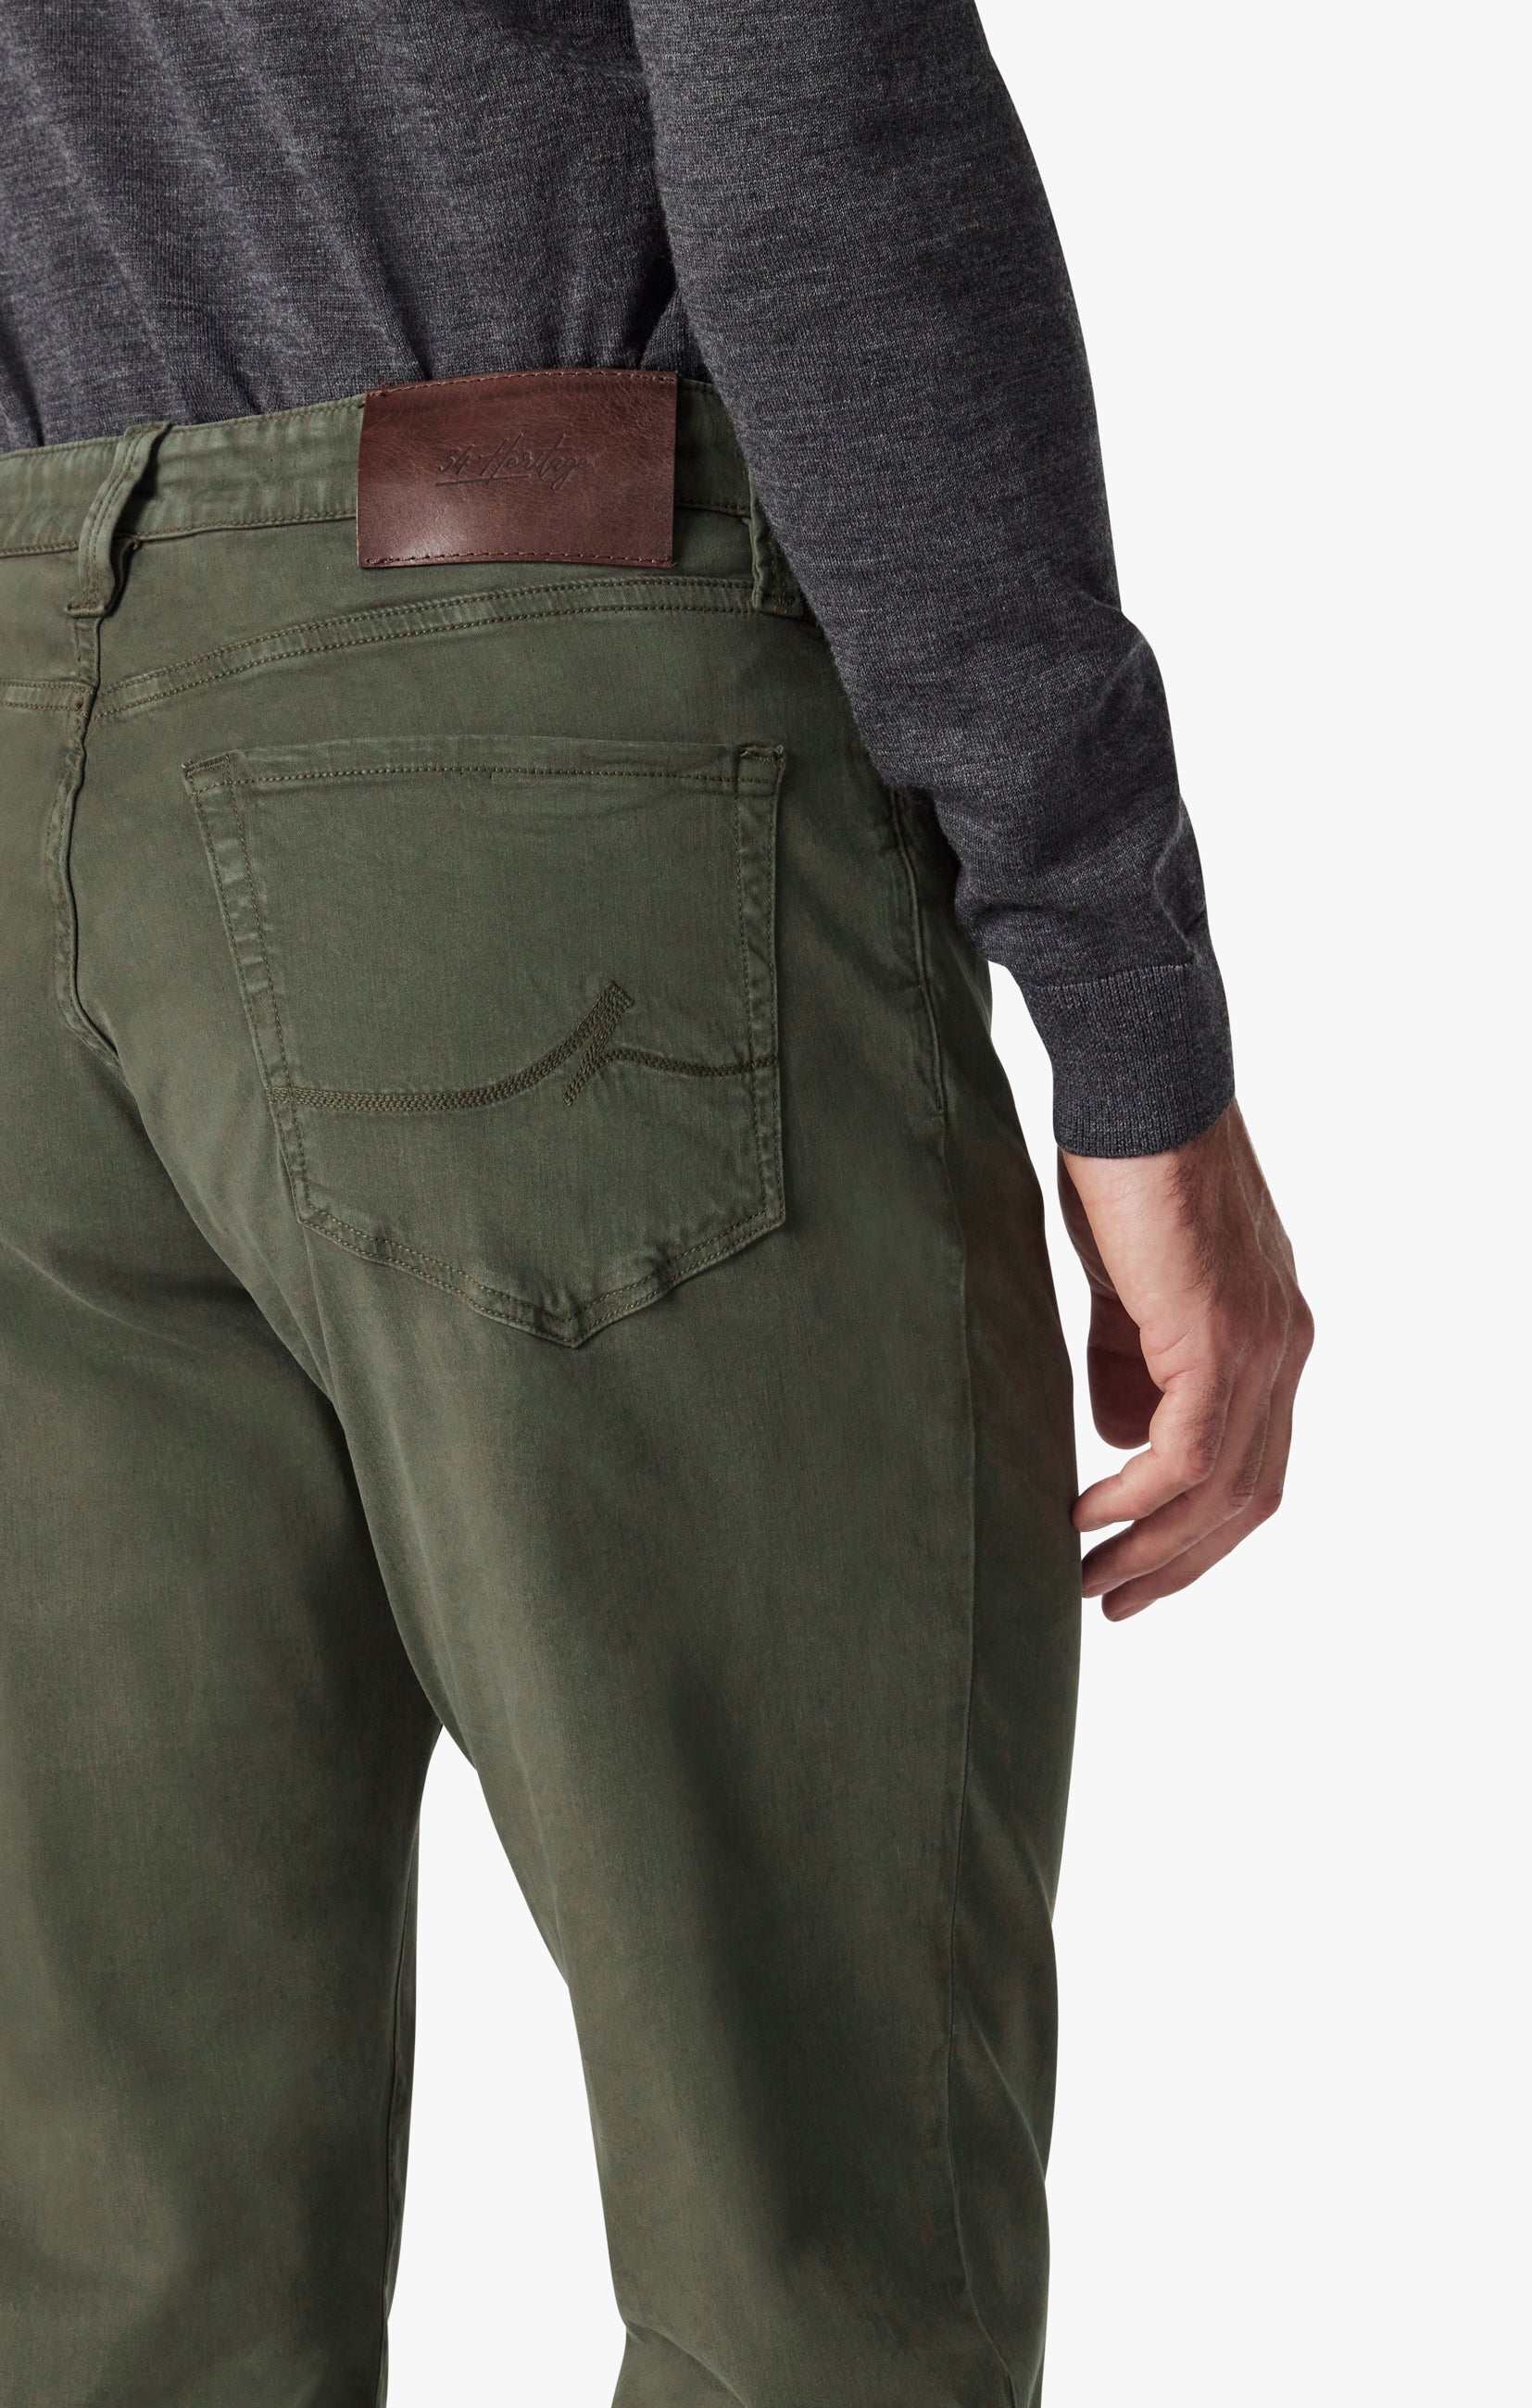 Charisma Relaxed Straight Leg Pants In Olive Twill Image 6